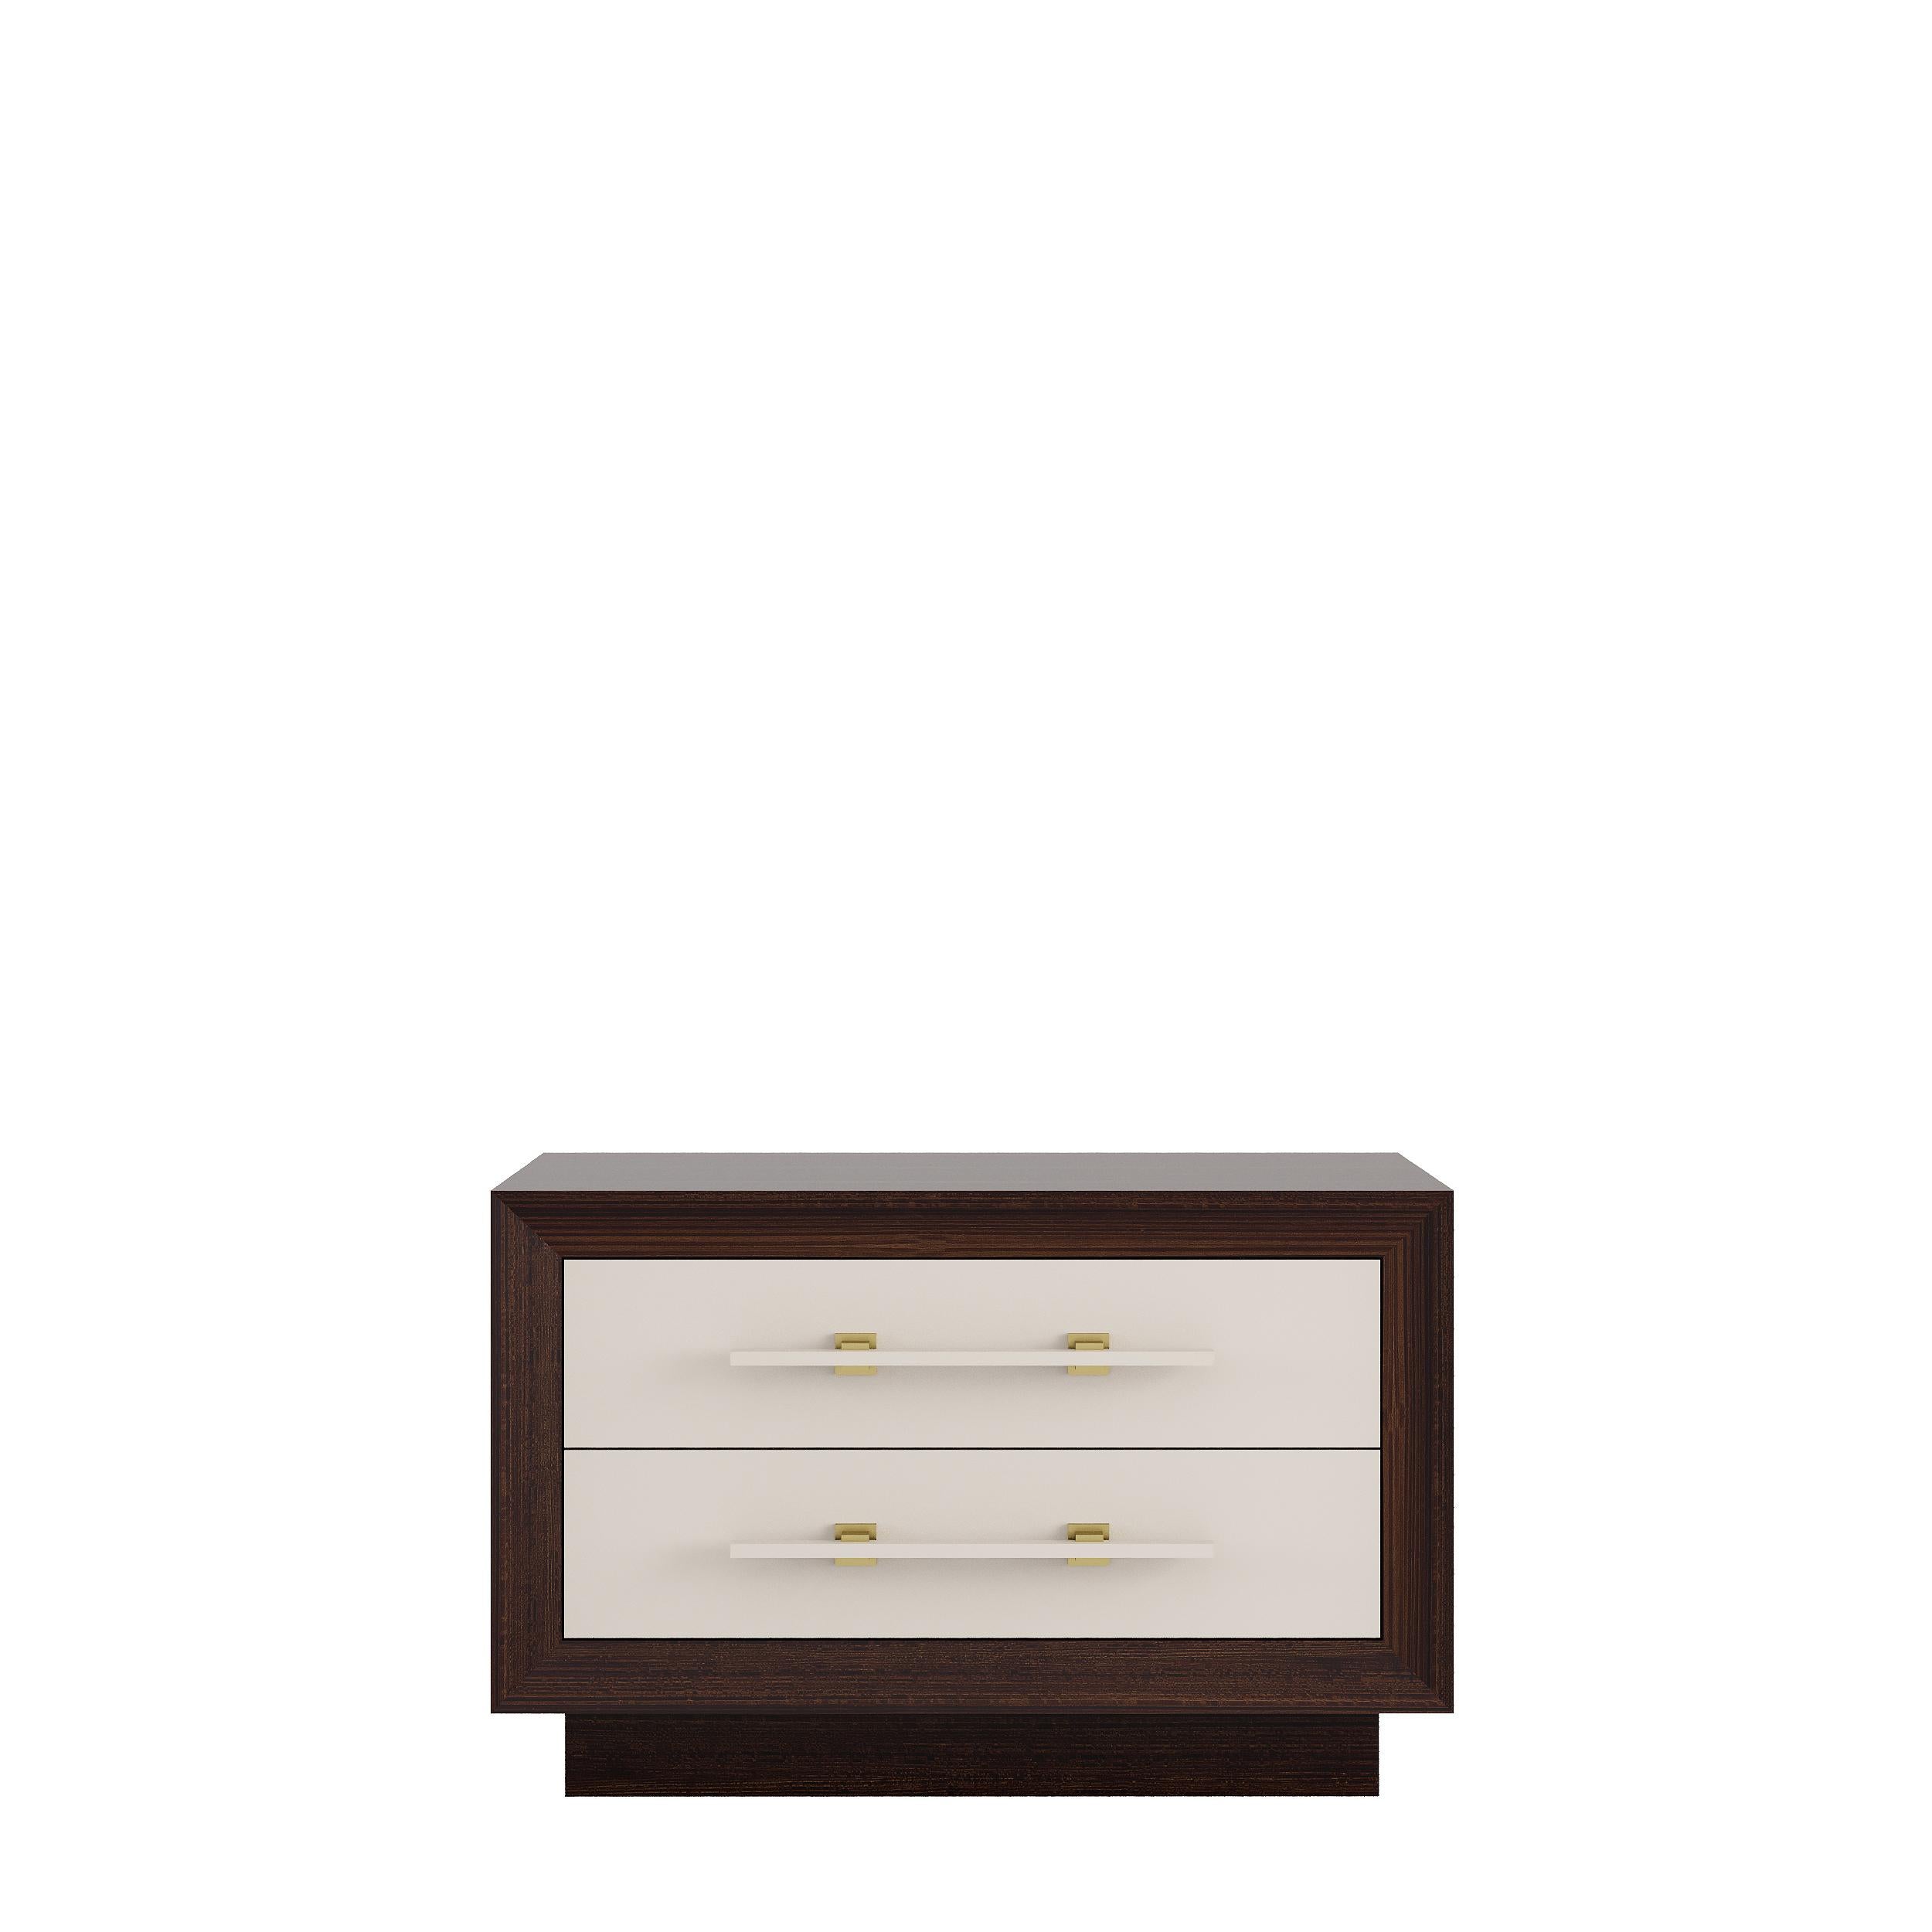 MAGNA is a robust and elegant nightstand, made of veneered wood with two lacquered drawers and embellished with brass details.‎ 

Finished in lacquer or veneered wood or simply combining both.

Primary image: shown in matte lacquered structure in